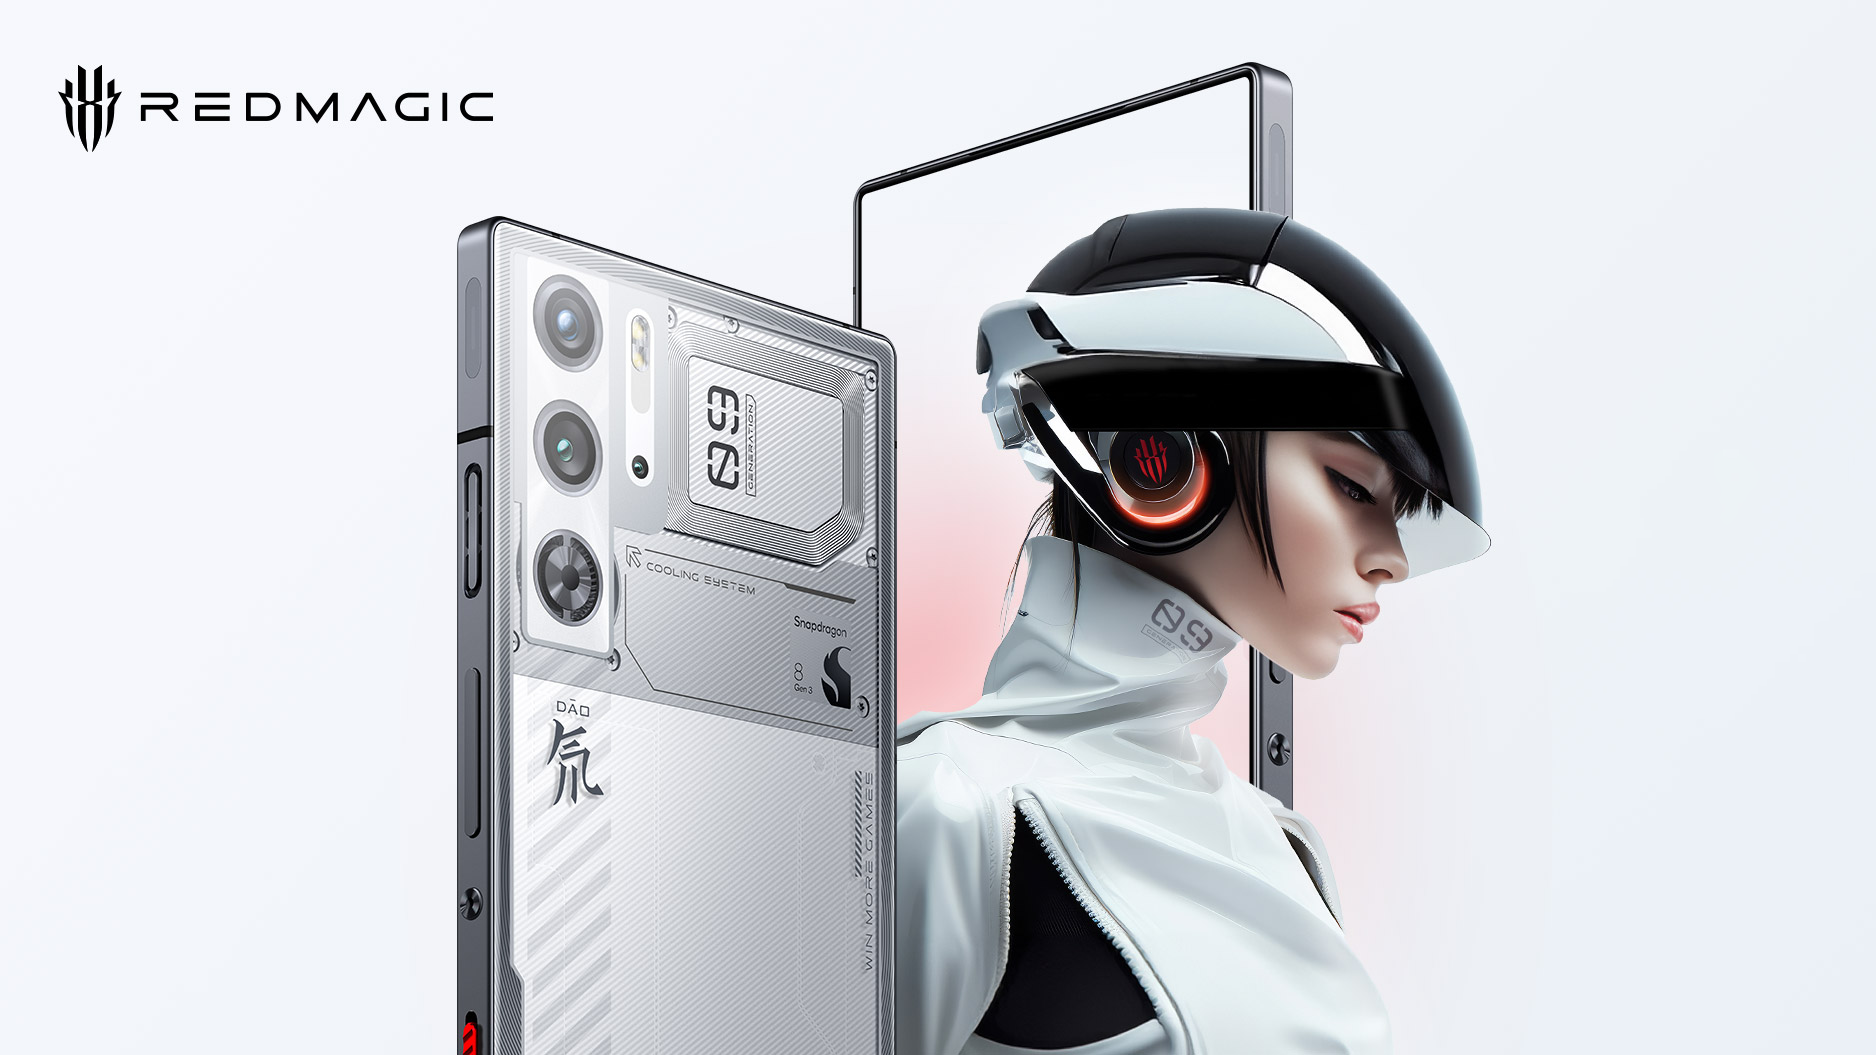 For Gamers & More  Introducing the REDMAGIC 9 Pro Gaming Phone